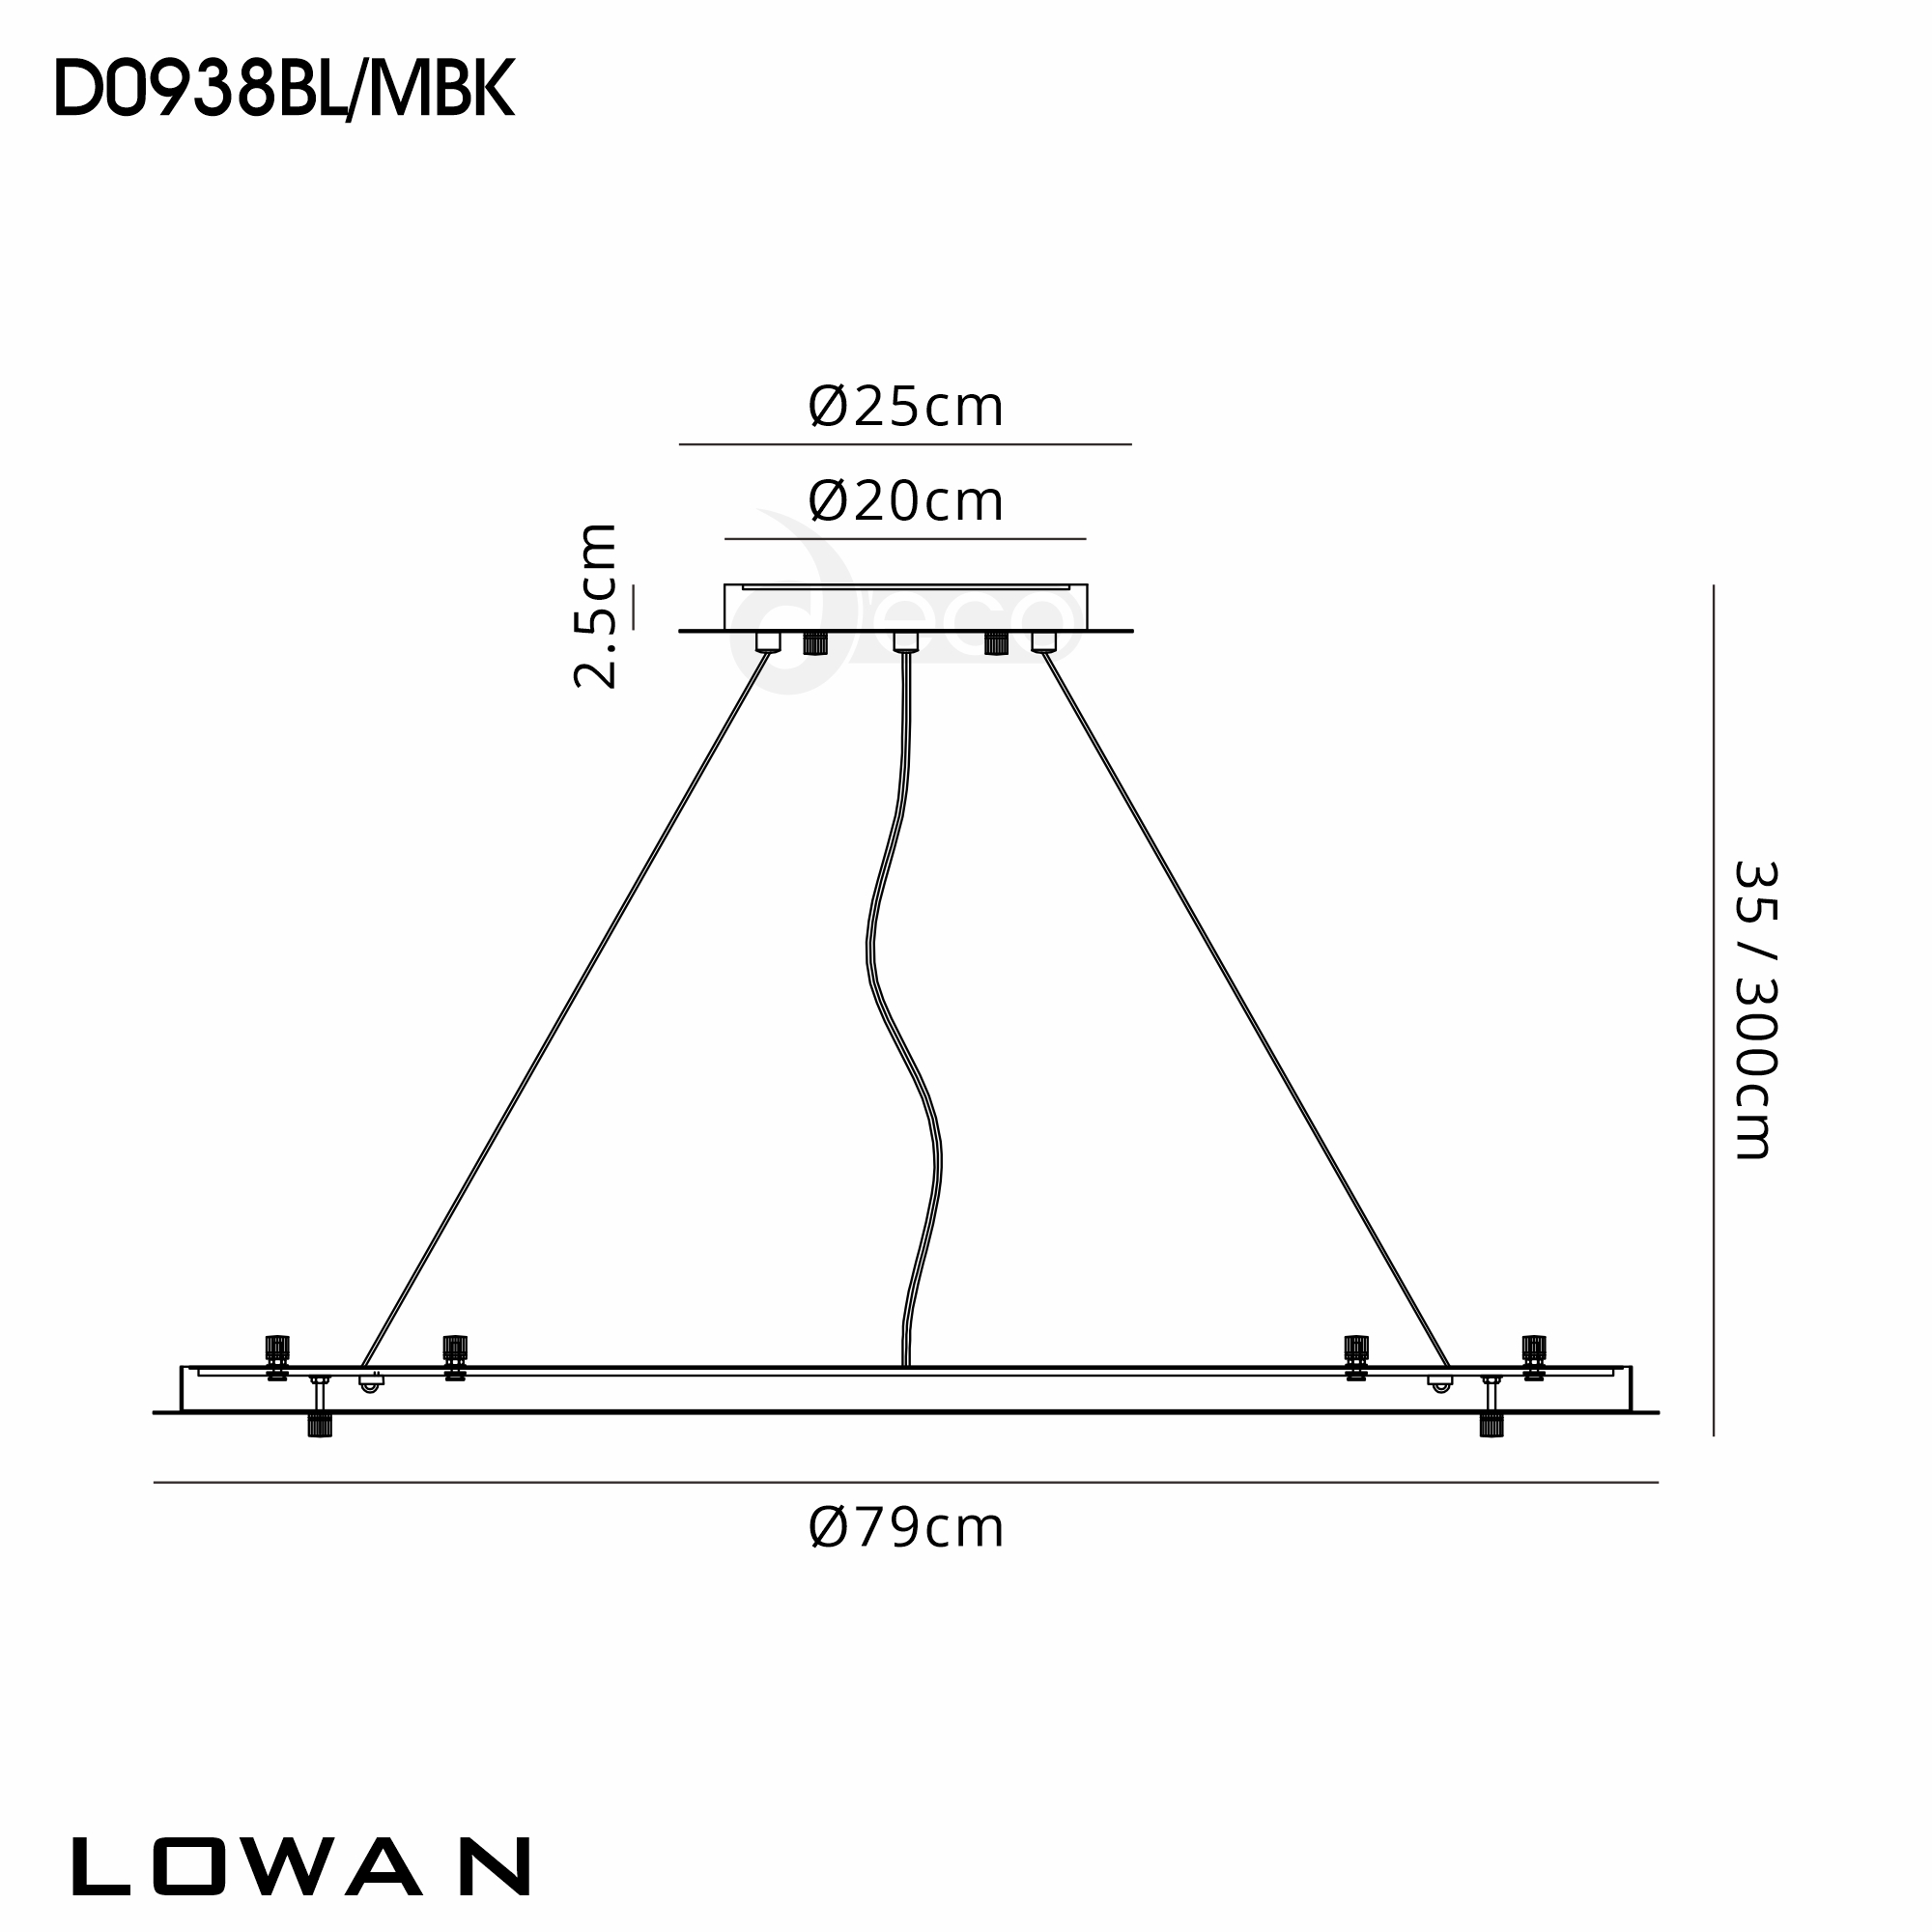 D0938BL/MBK  Lowan 790mm, 3m Suspension Plate c/w Power Cable To Lower Flush Fittings, Satin Black/Matt Black Max Load 40kg (ONLY TESTED FOR OUR RANGE OF PRODUCTS)